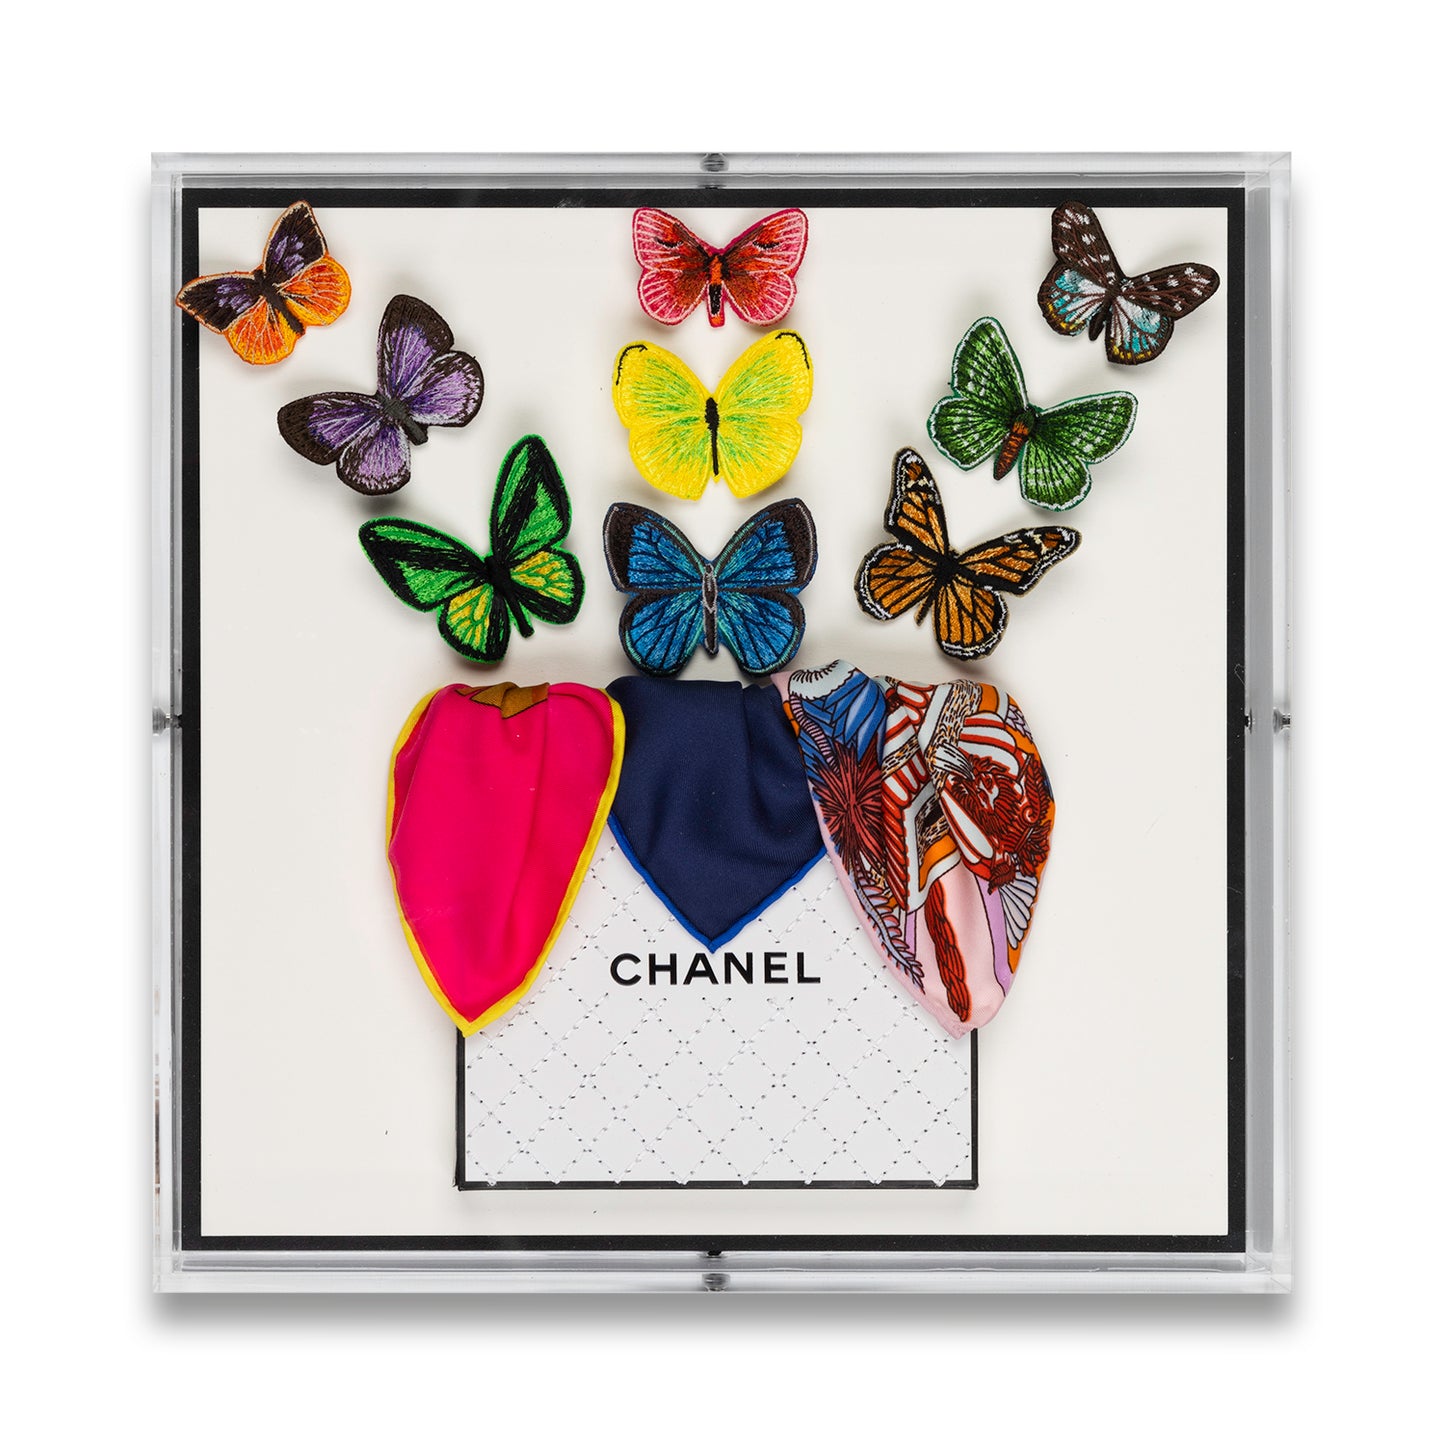 Chanel White Butterfly Surprise by Stephen Wilson (12x12x2")